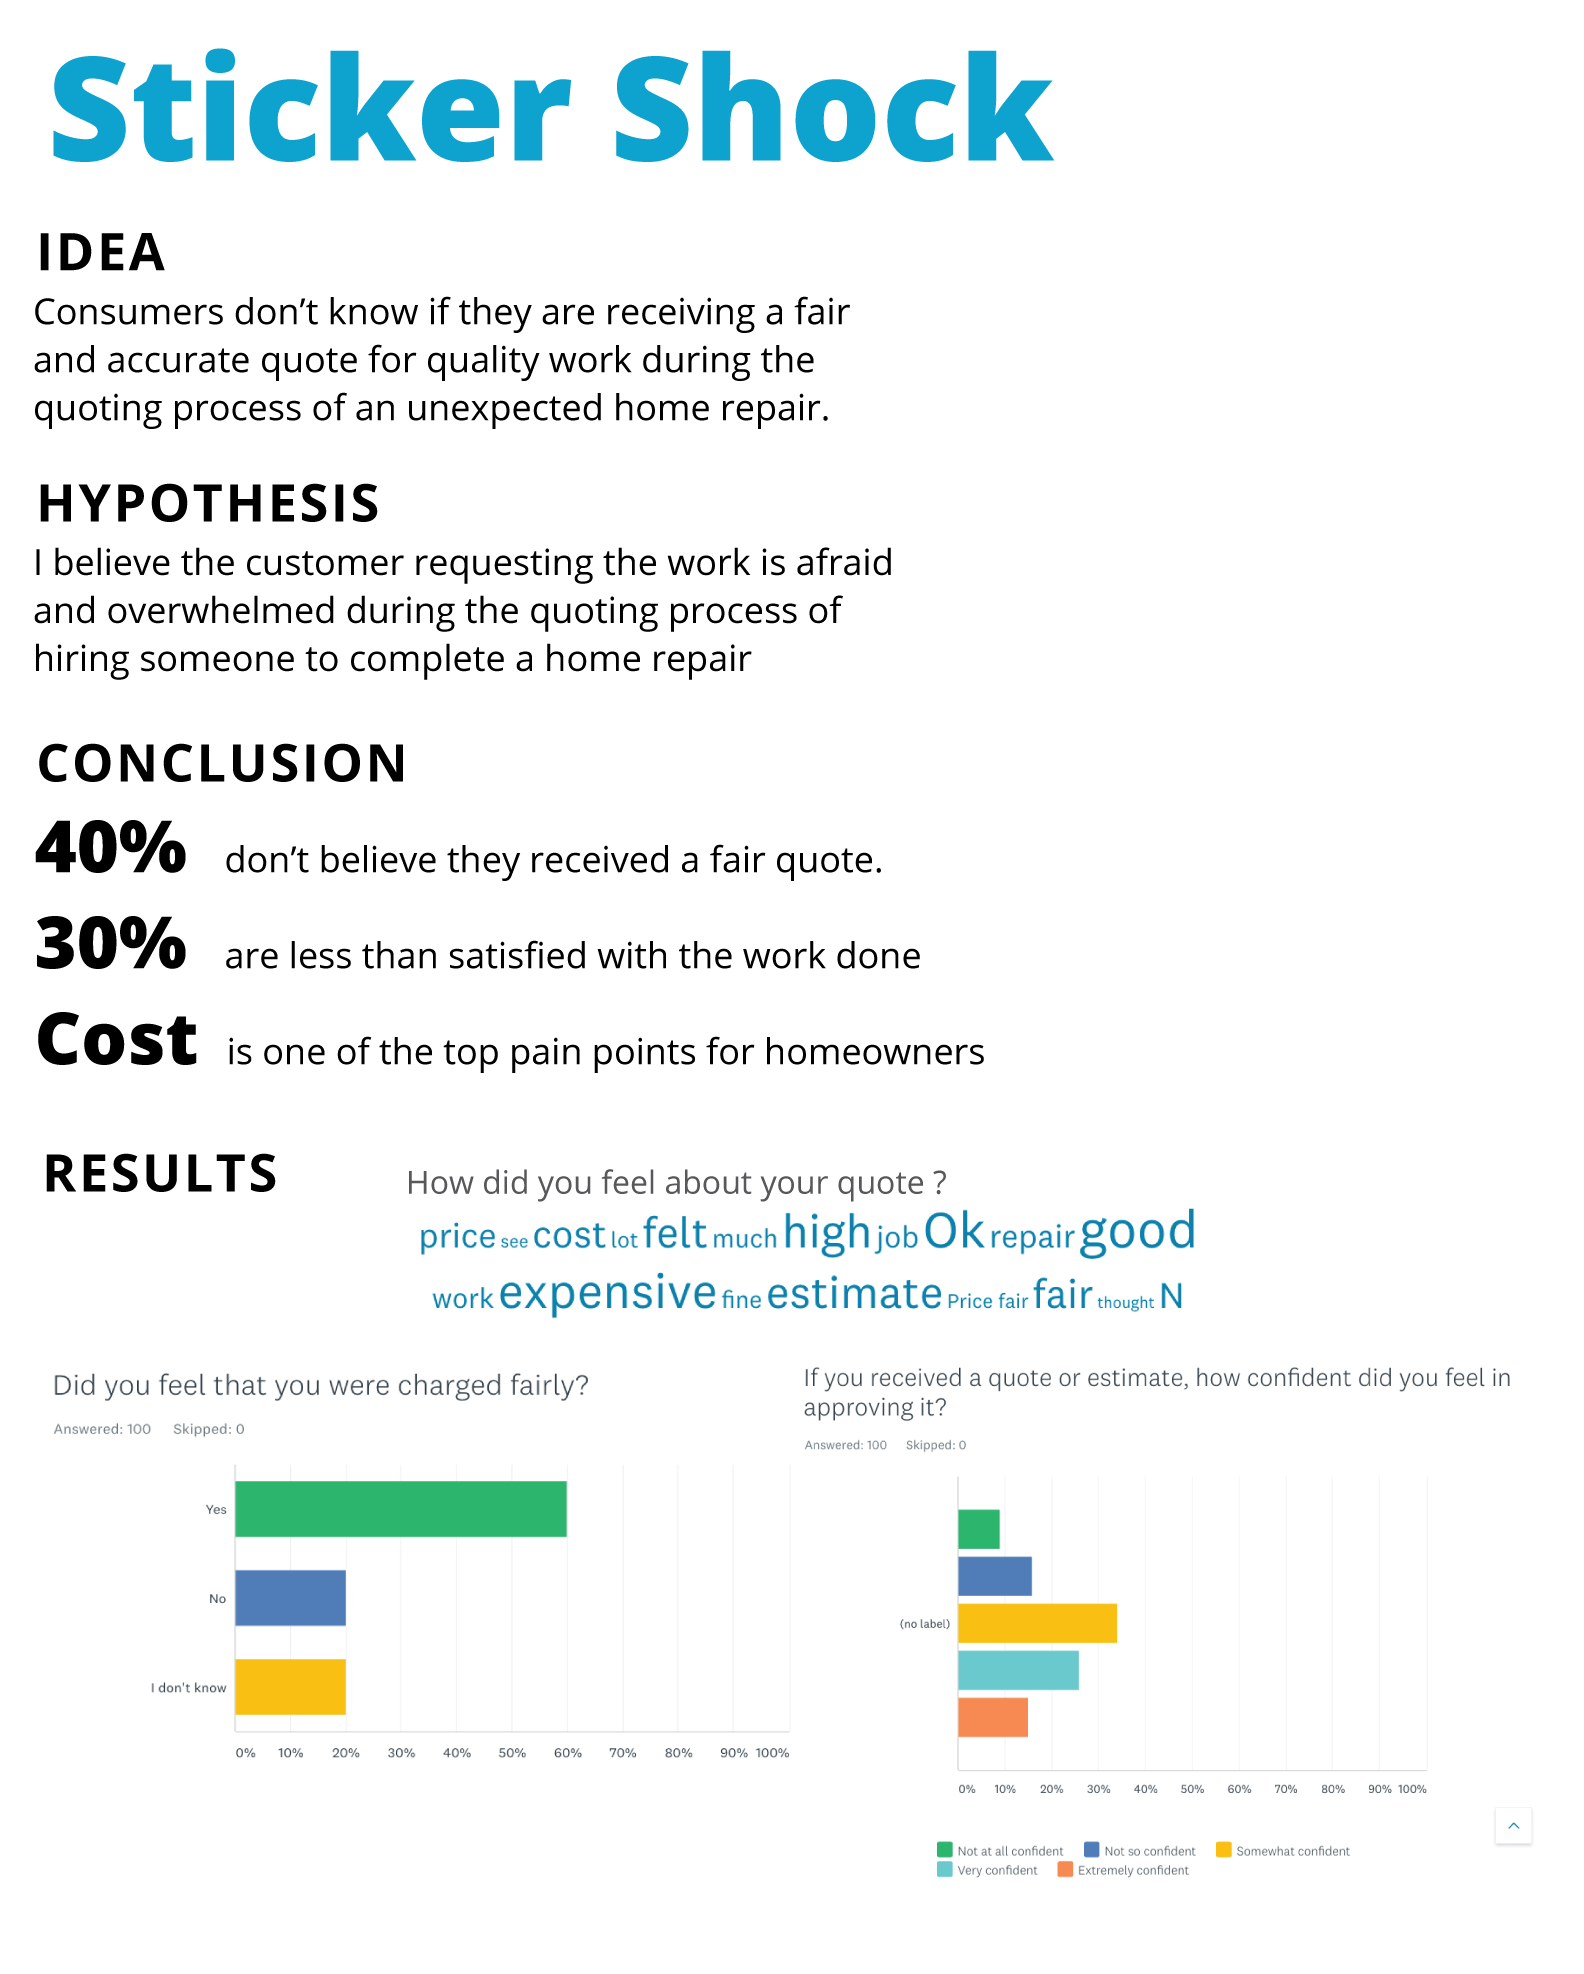 experiment results